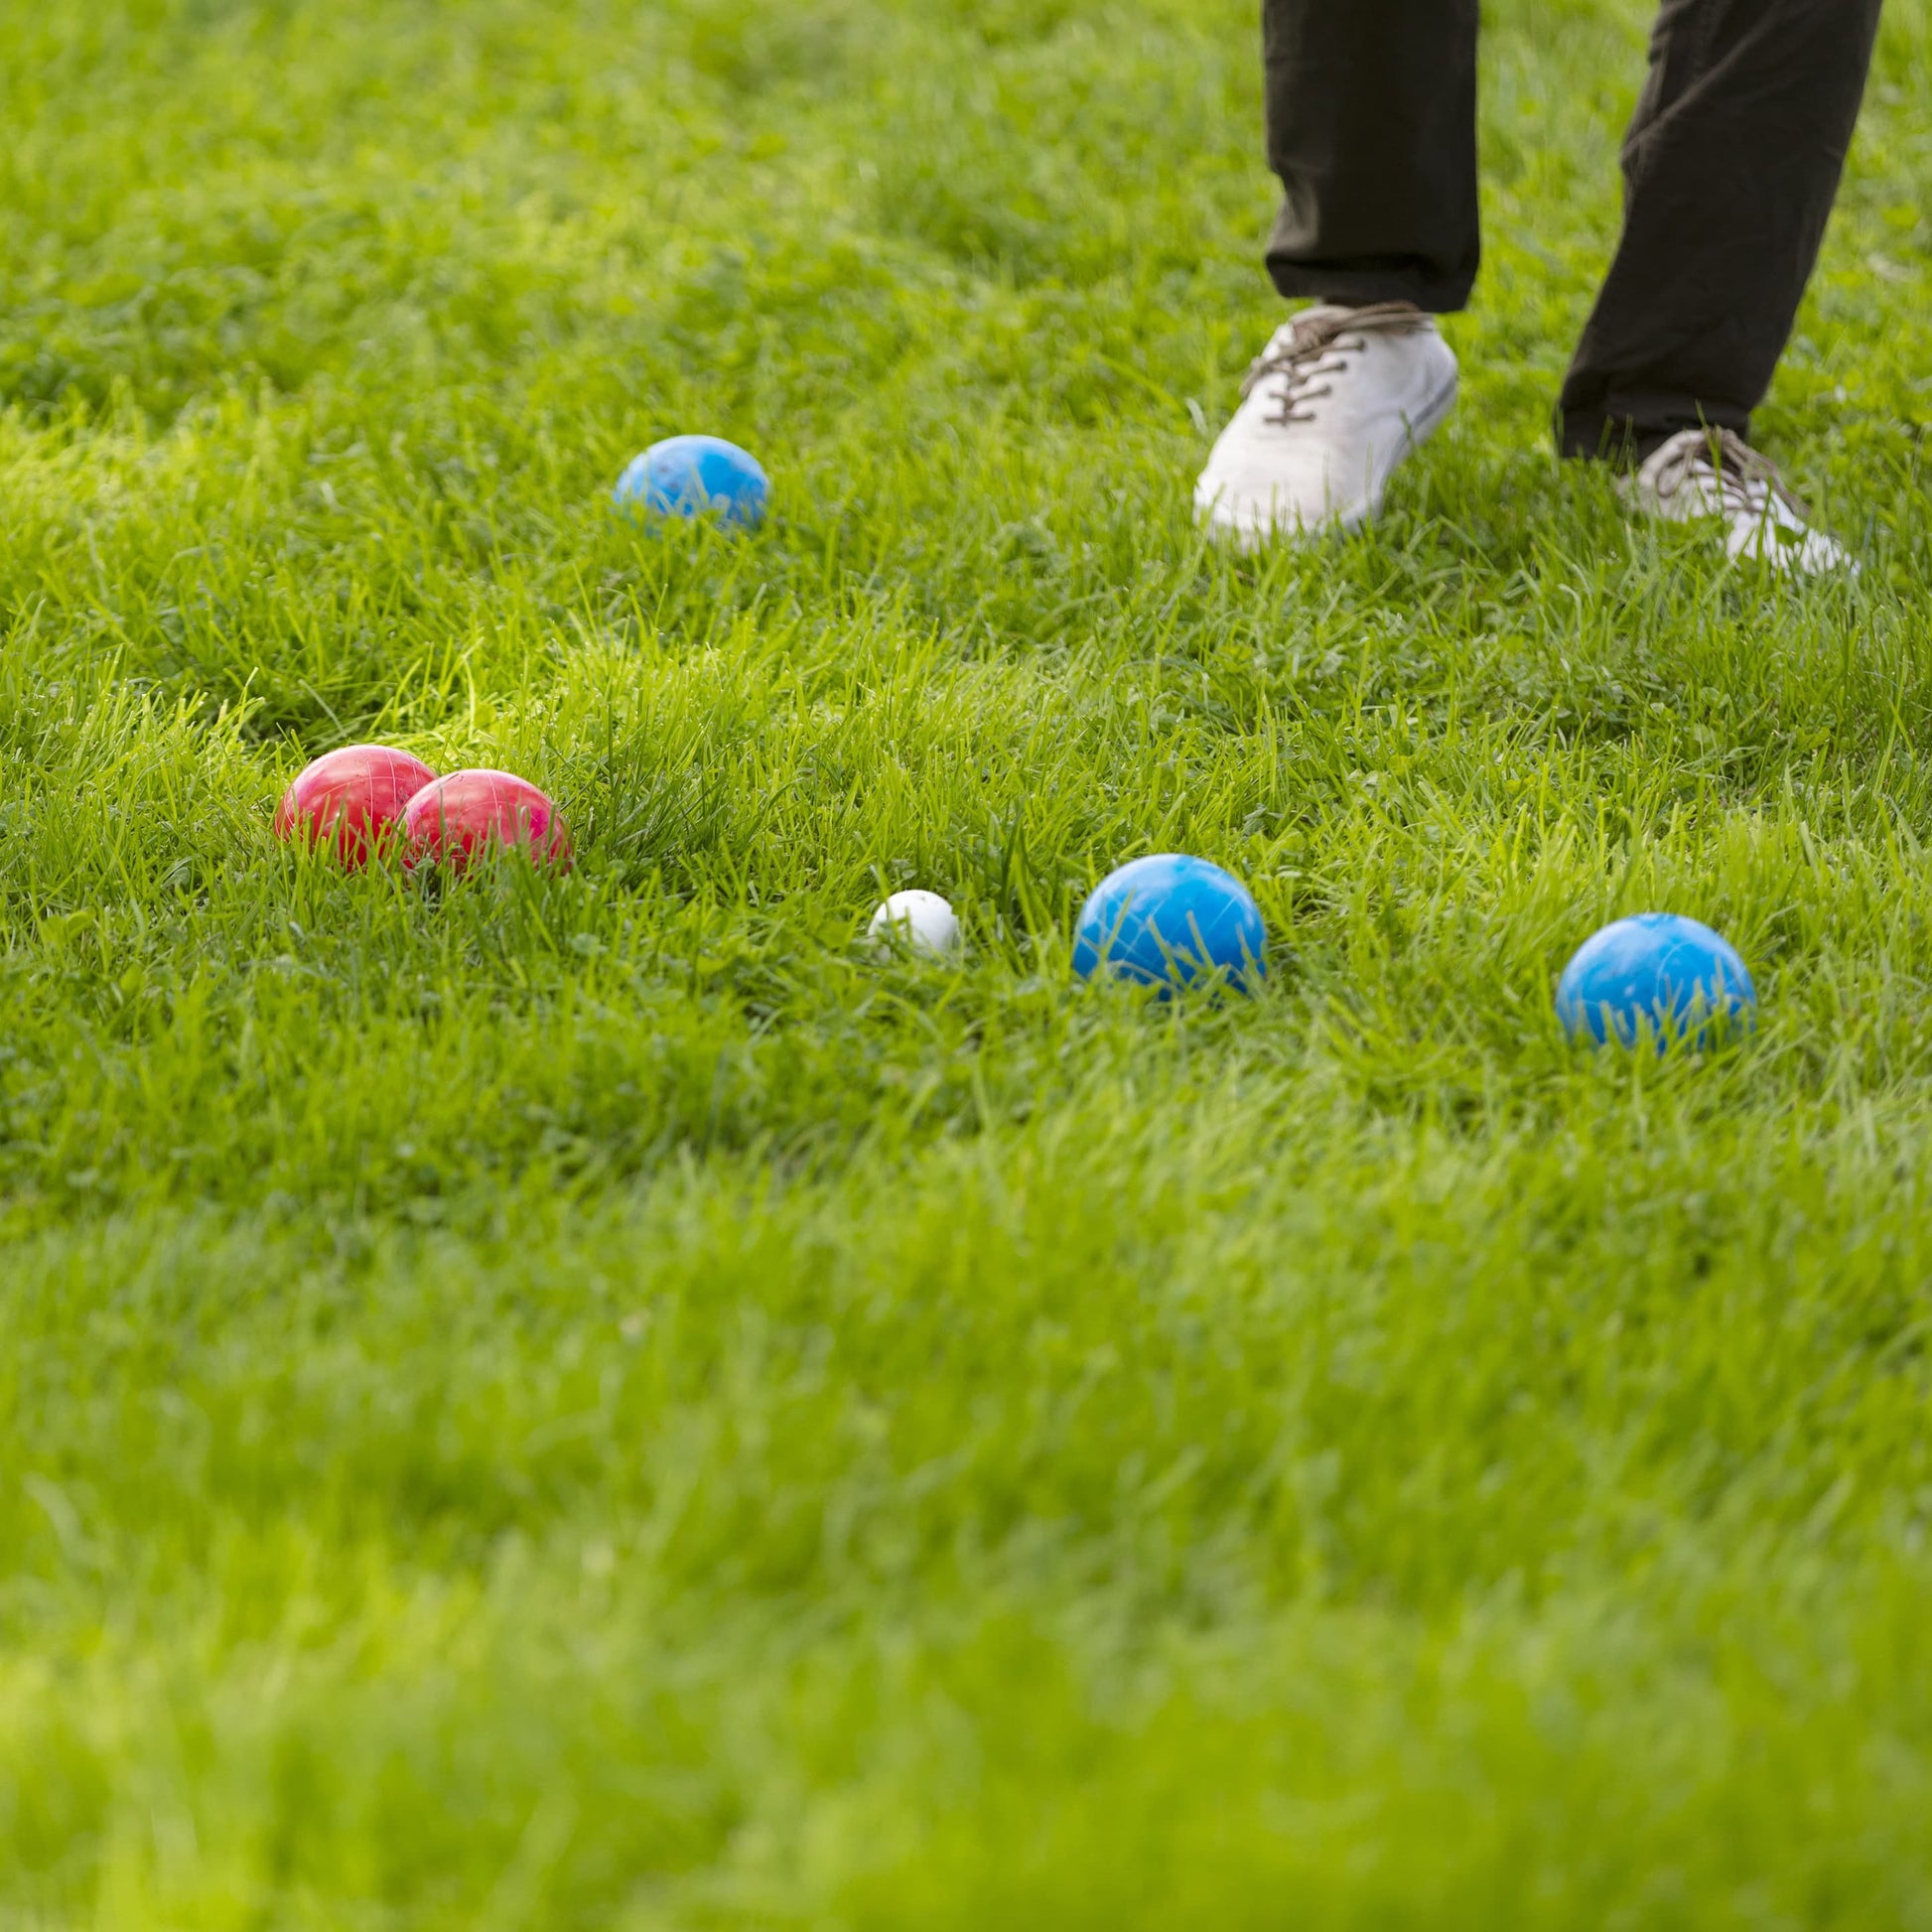 Sportcraft Bocce Ball Set Lifestyle Image, Men playing Bocce Ball in a park, closeup of balls on grass